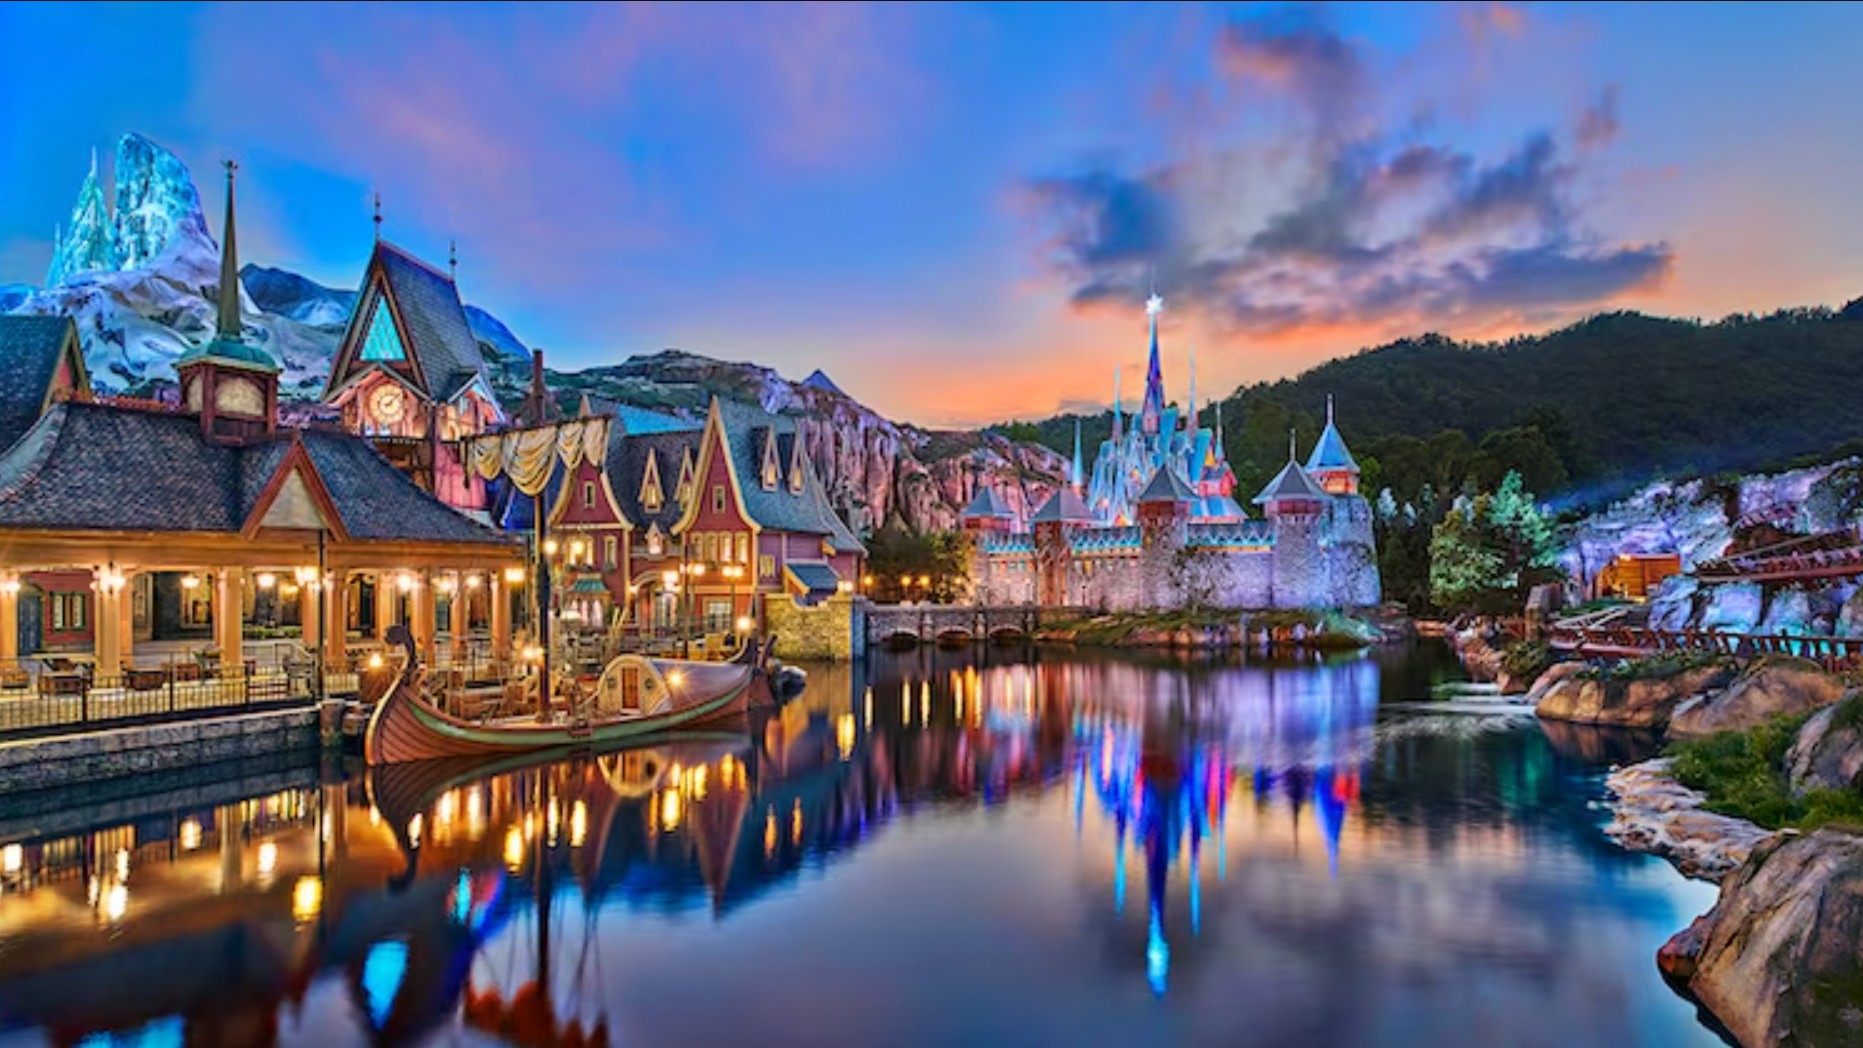 Arendelle village serves as the centerpiece of the World of Frozen themed land at Hong Kong Disneyland. (Courtesy of Disney)